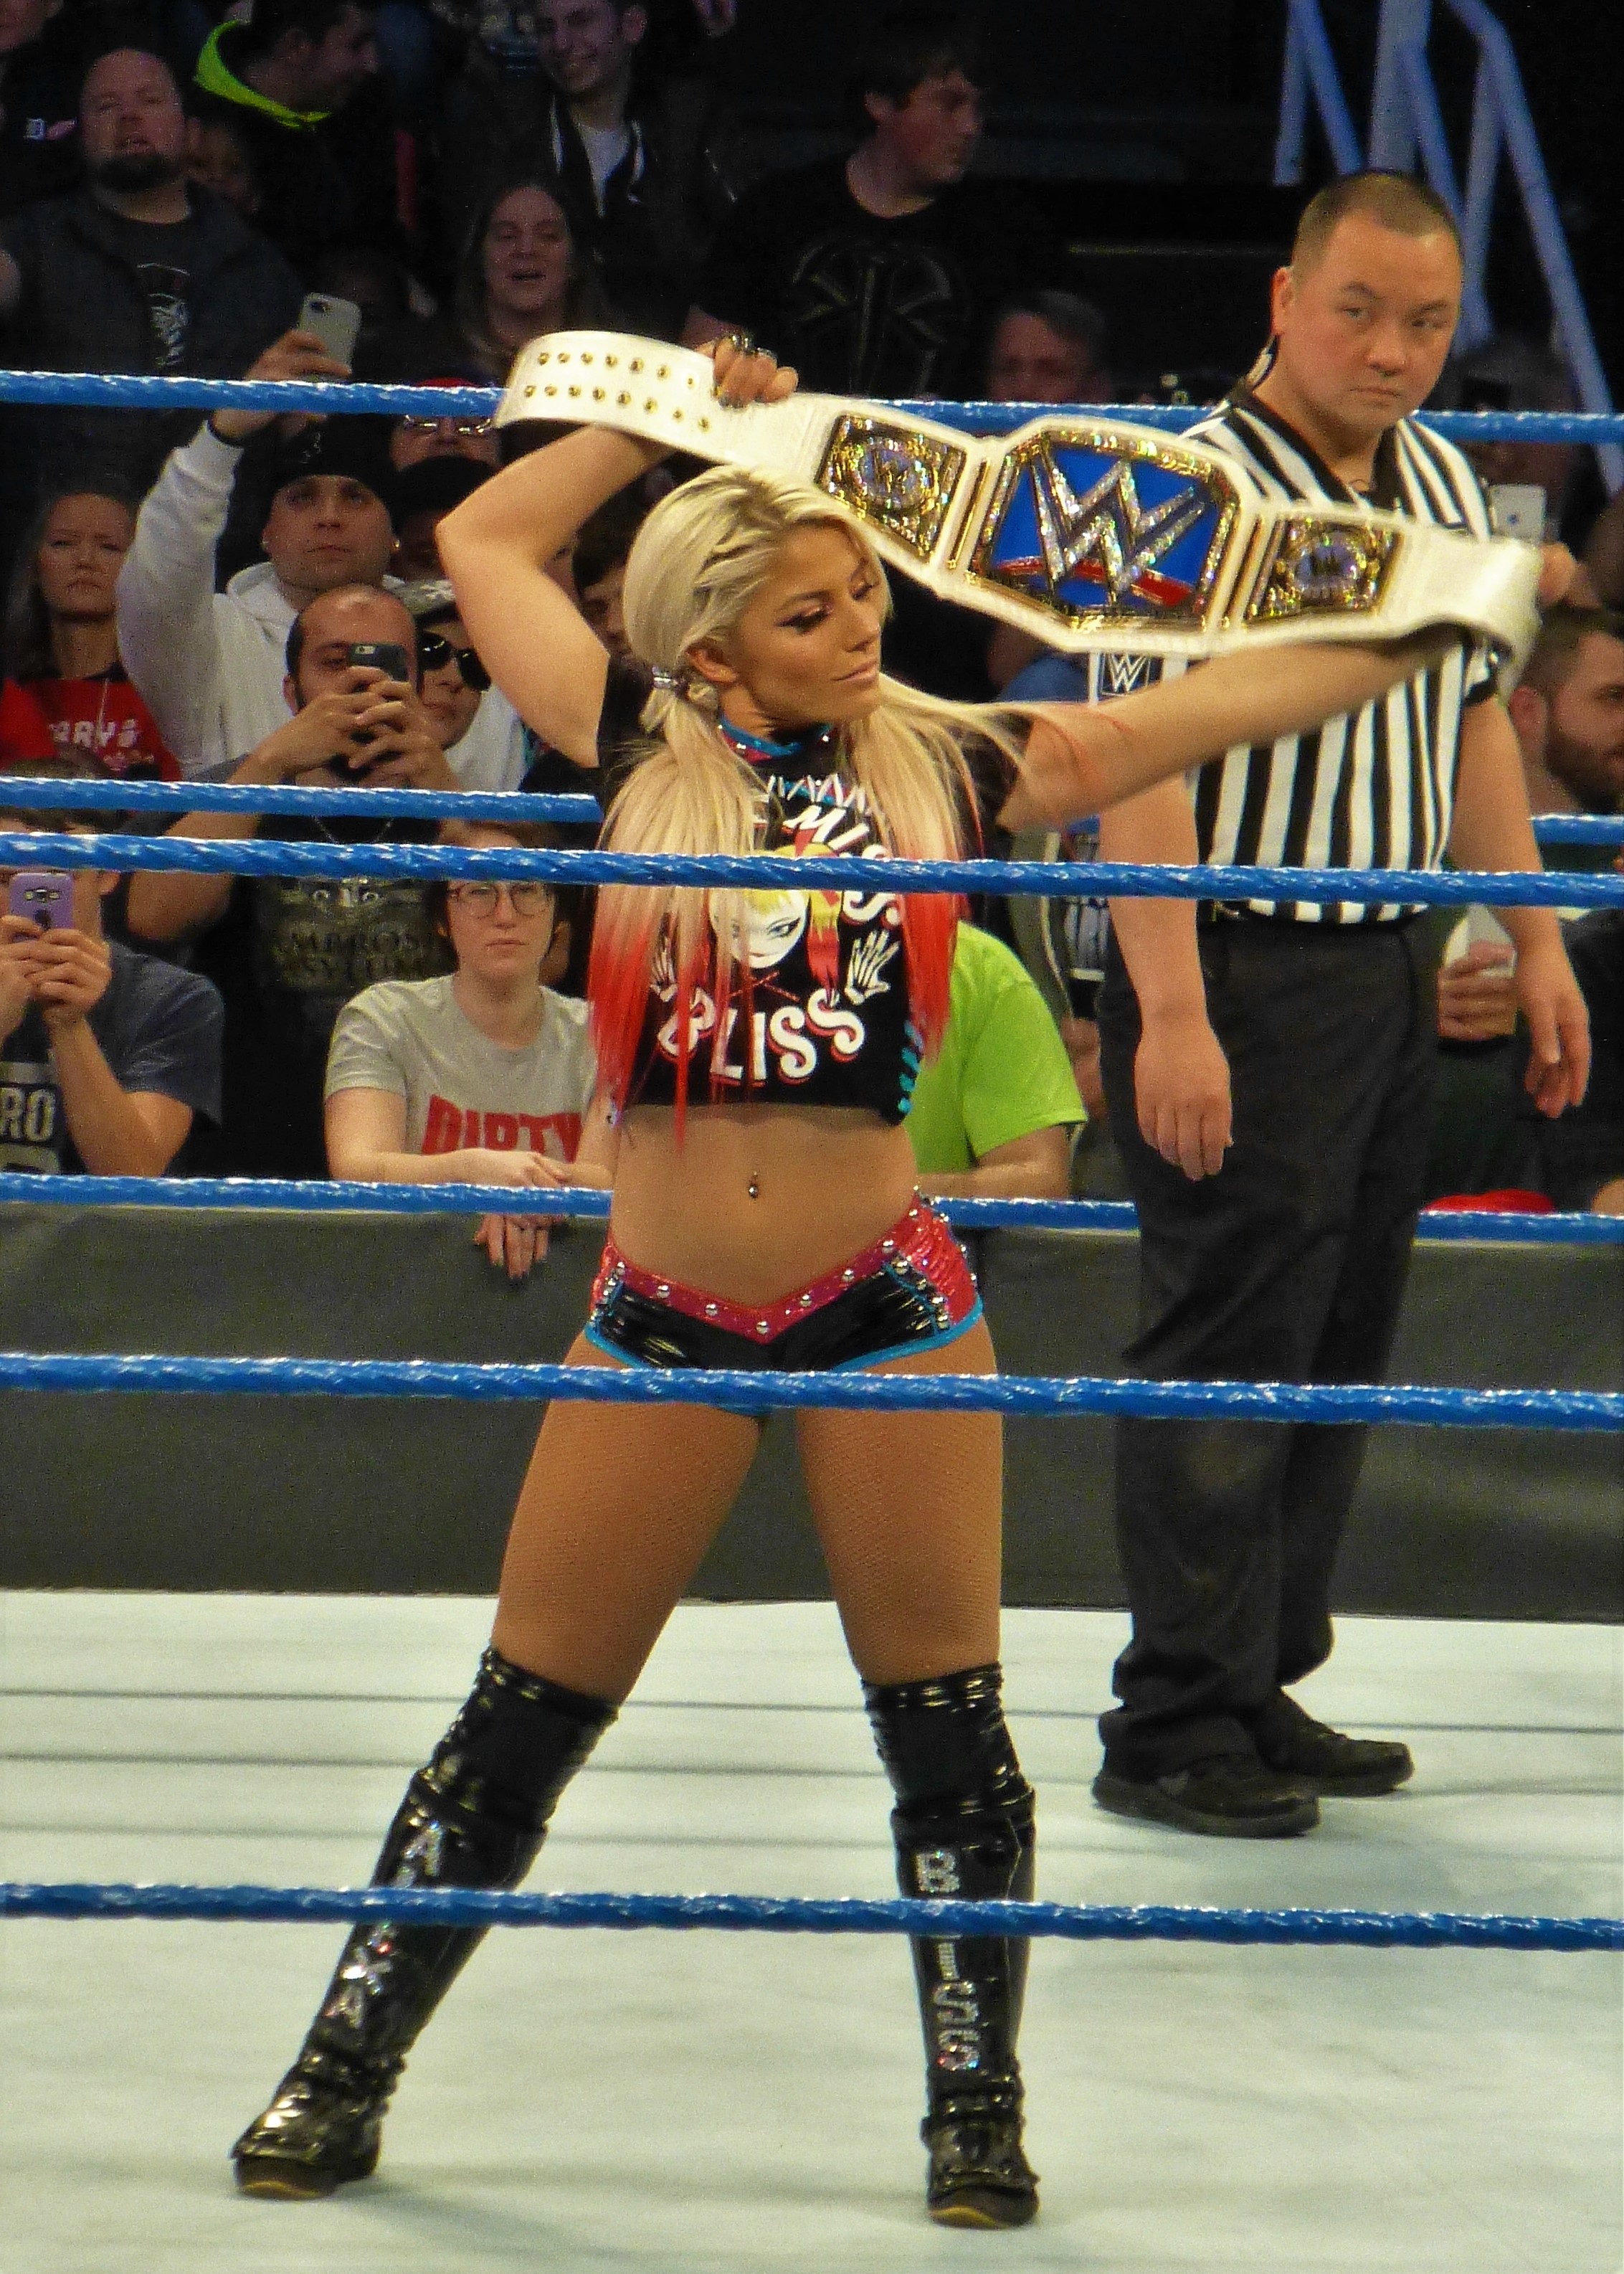 Alexa Bliss would thrive in the IMPACT Wrestling women's division